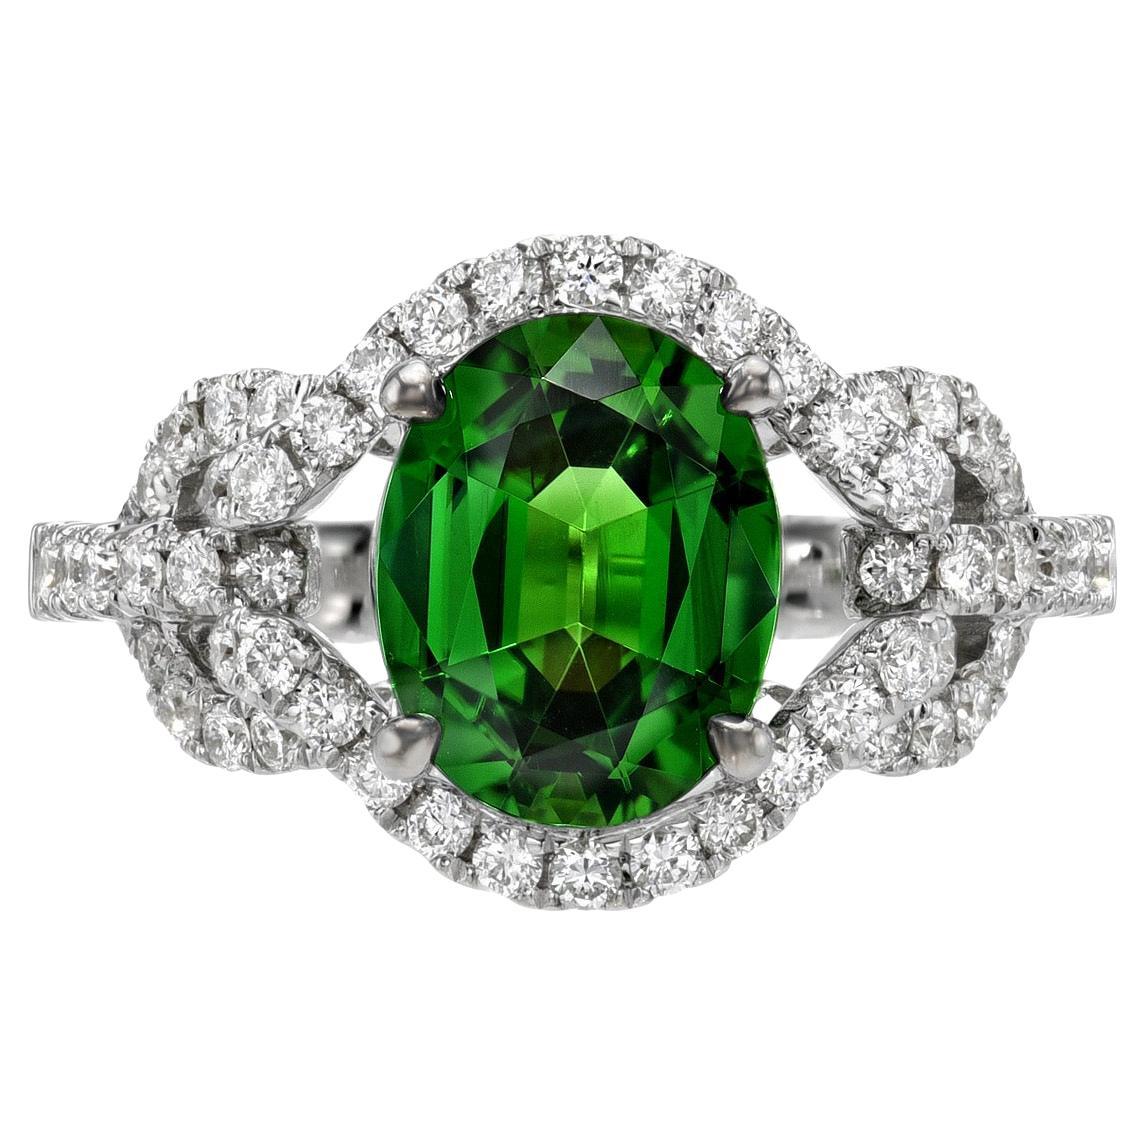 Oval Cut Green Chrome Tourmaline Ring 1.86 Carat Oval For Sale